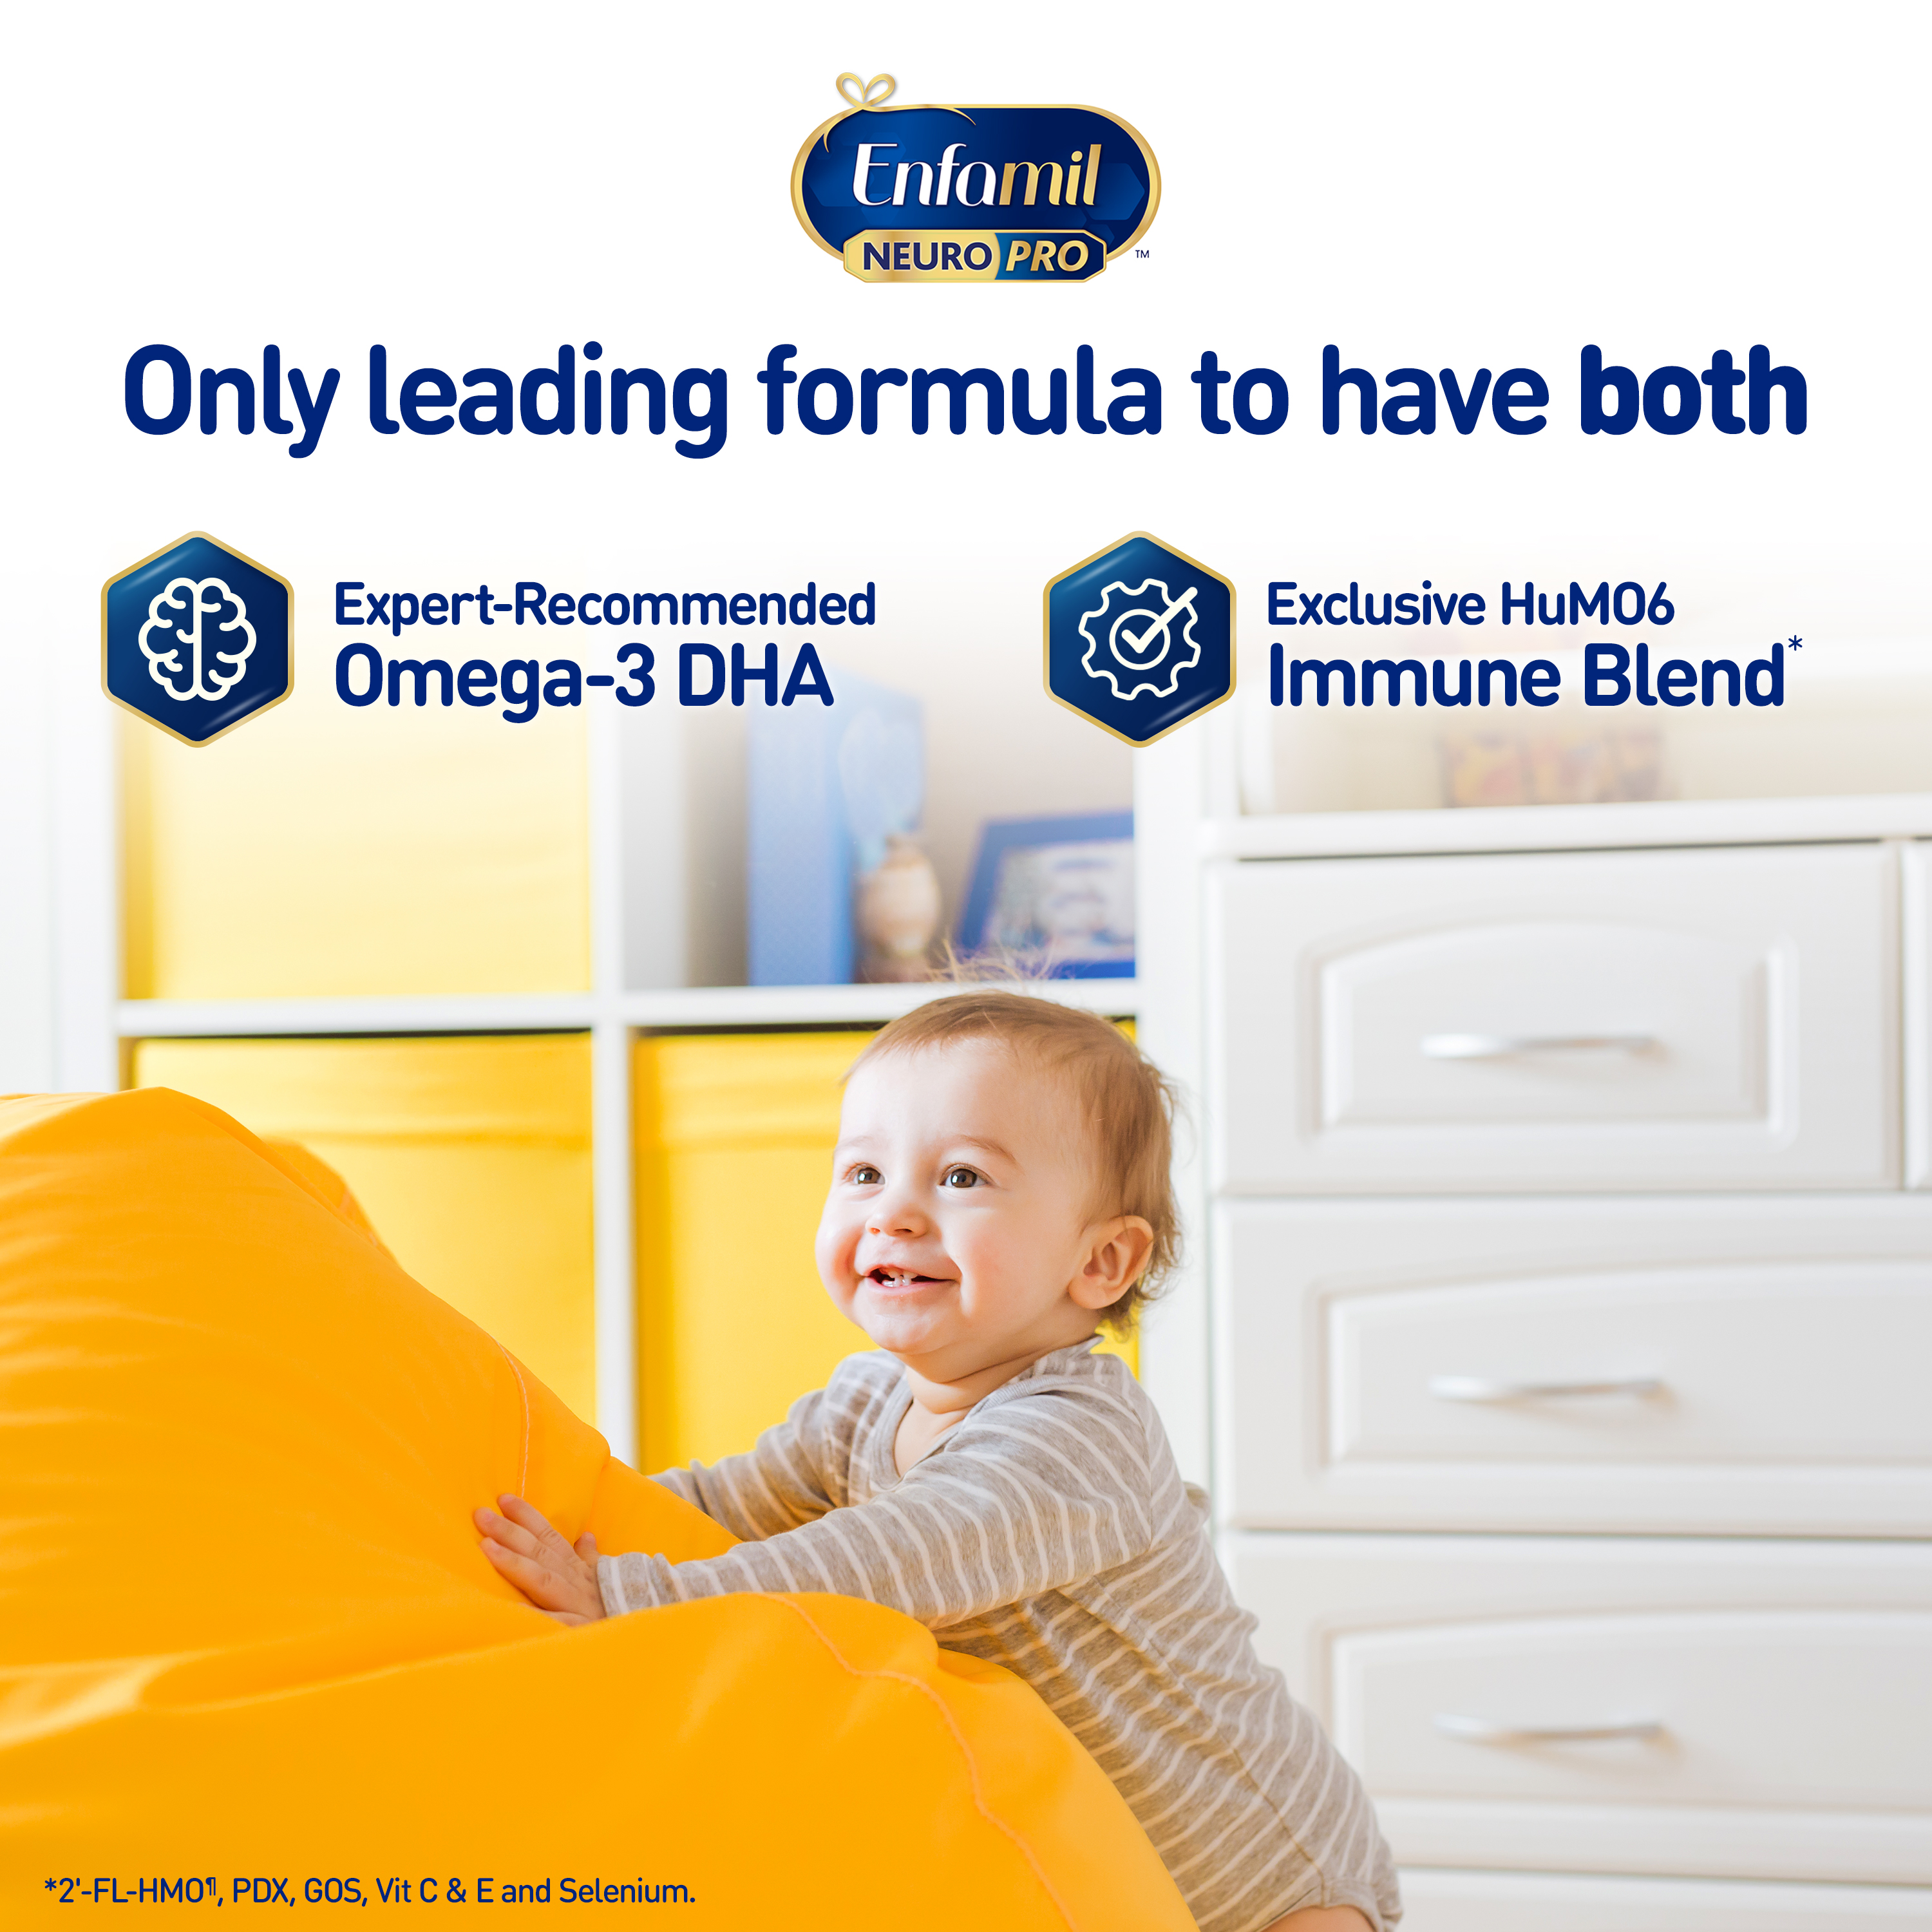 Enfamil NeuroPro Baby Formula, Milk-Based Infant Nutrition, MFGM* 5-Year Benefit, Expert-Recommended Brain-Building Omega-3 DHA, Exclusive HuMO6 Immune Blend, Non-GMO, 20.7 oz​ - image 5 of 15